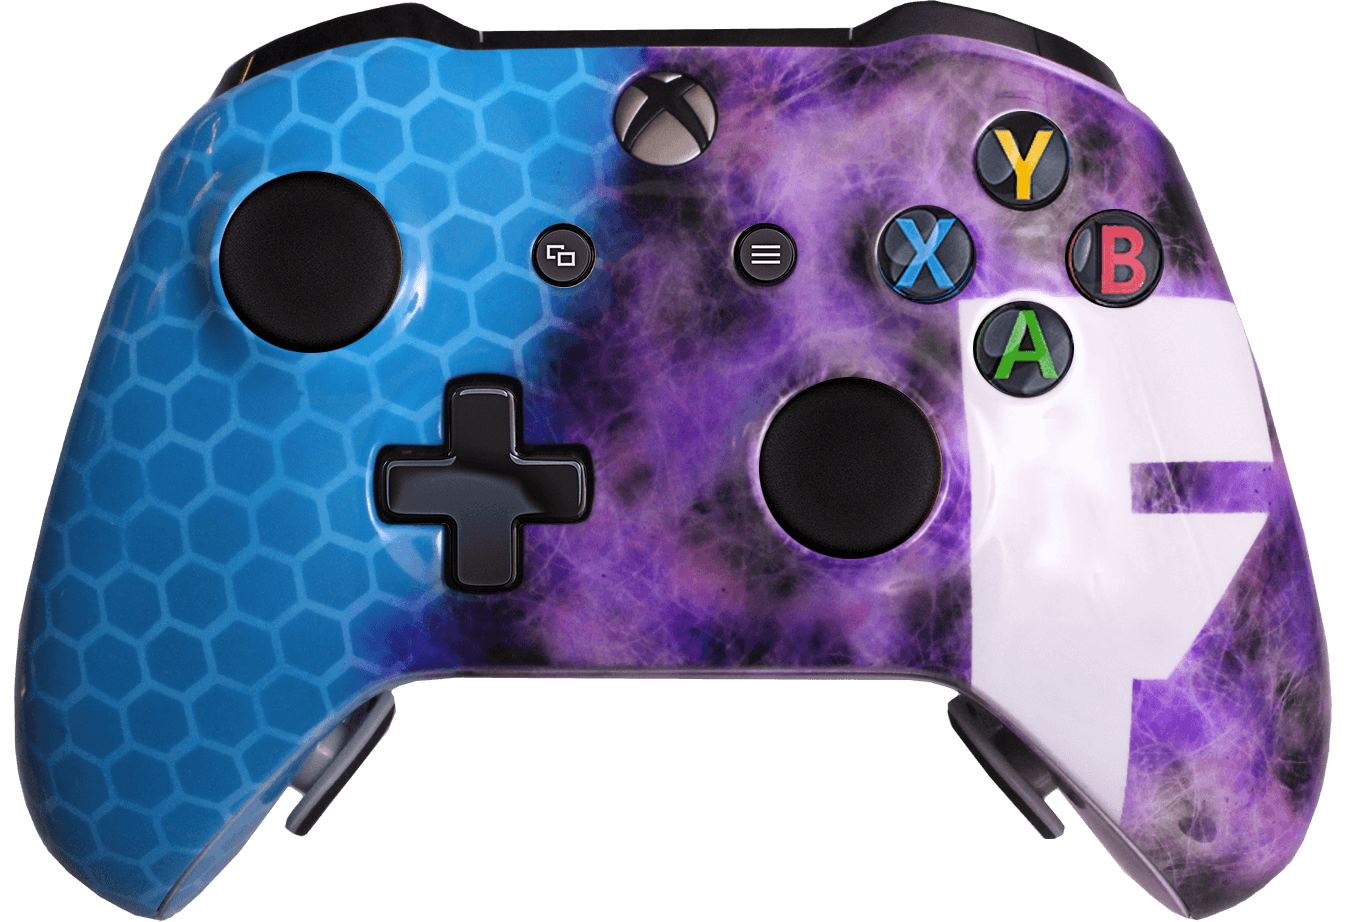 Xbox One Evil Fortnite Controller Evil Controllers